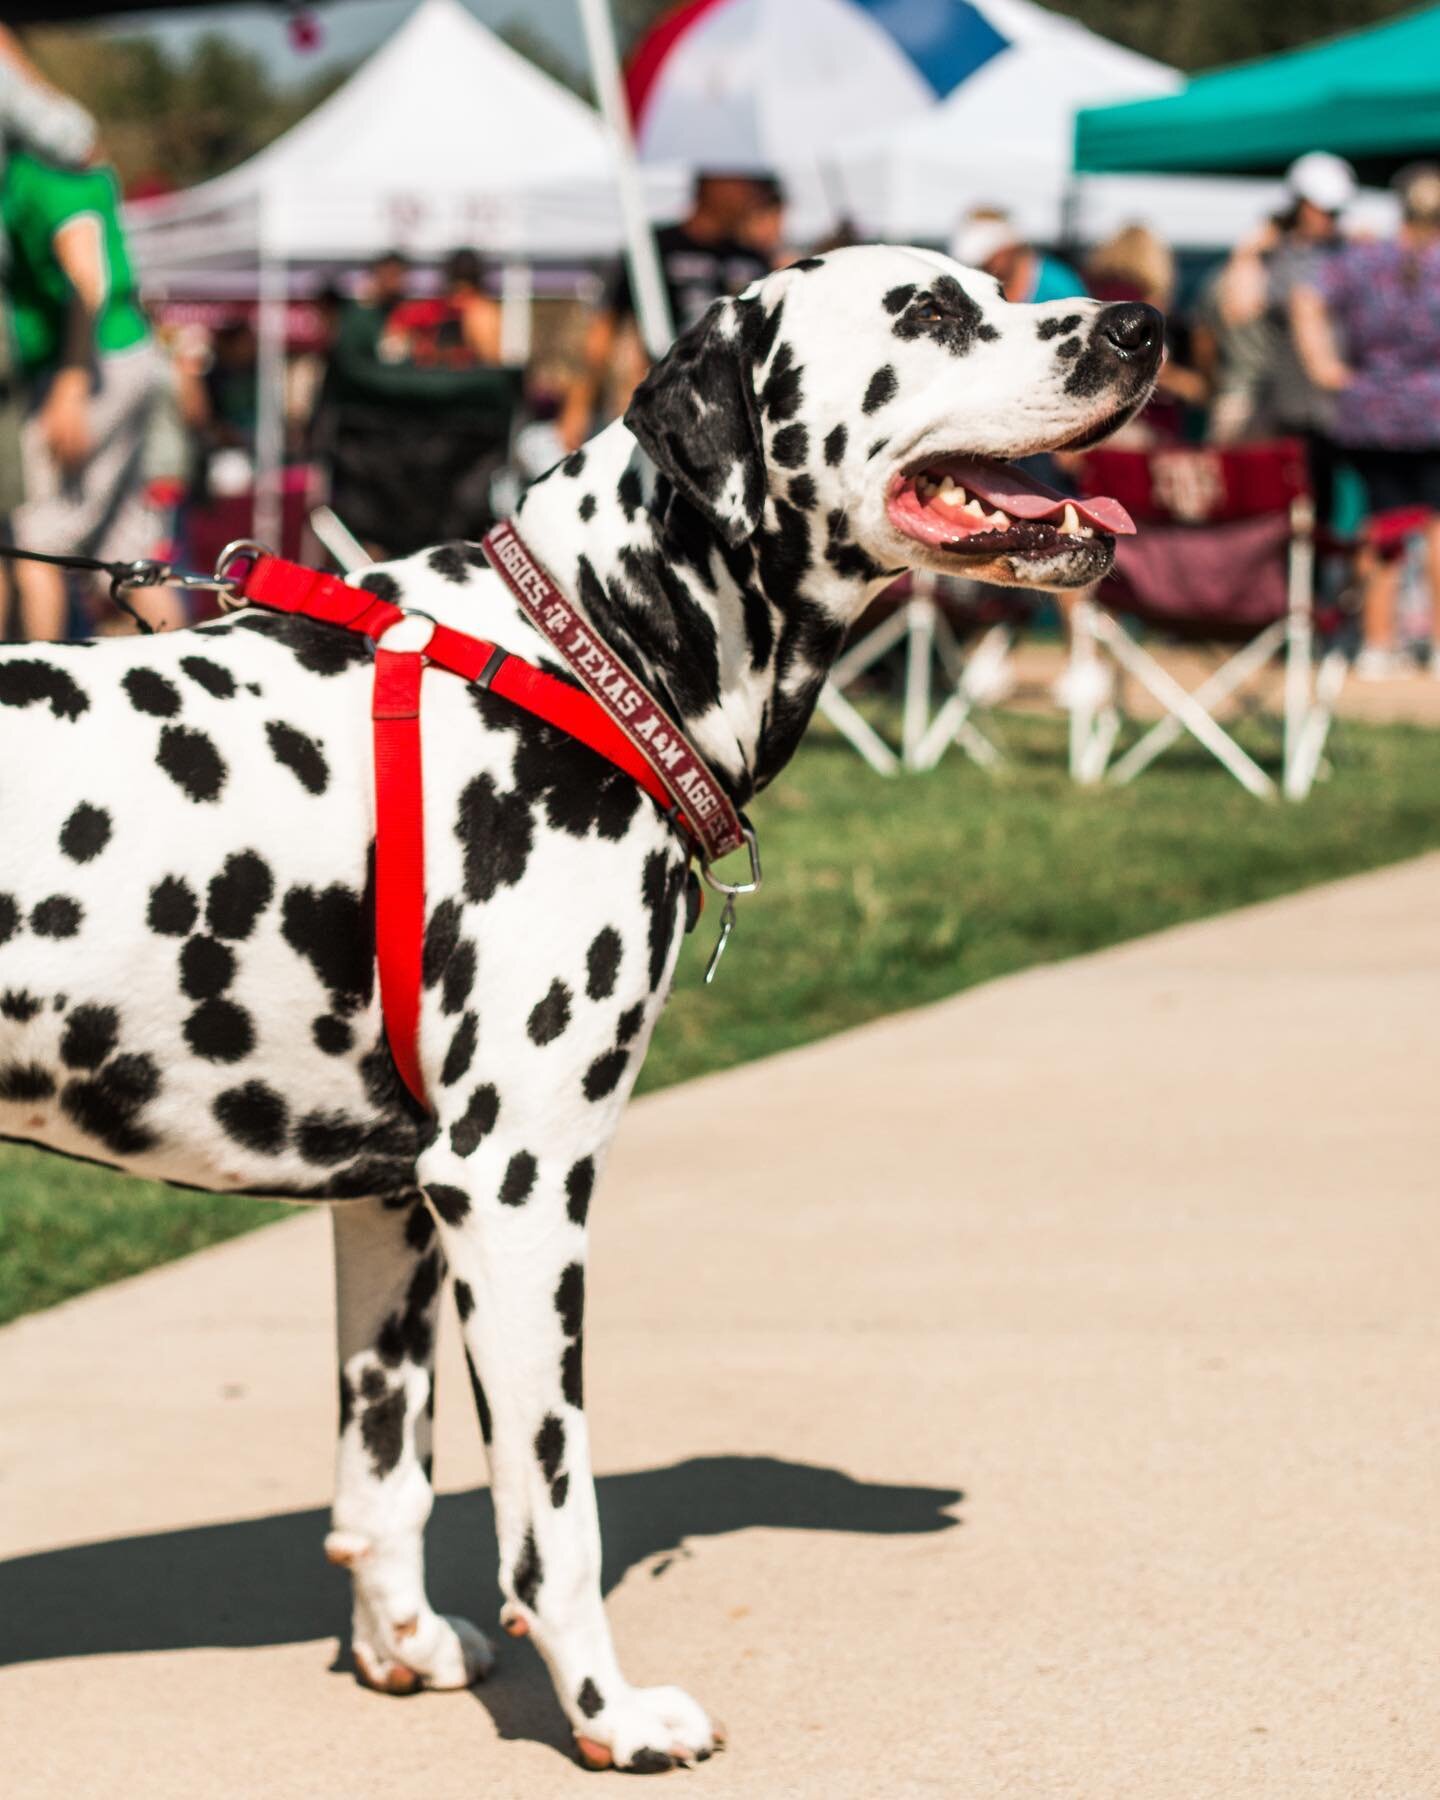 I&rsquo;m seeing spots, but how many spots is the real question, because I&rsquo;m not counting 😆
&bull;
#dalmationsofinstagram #dalmatian #animalphotographer #dogphotographer #wienerfest2019 #canon_usa